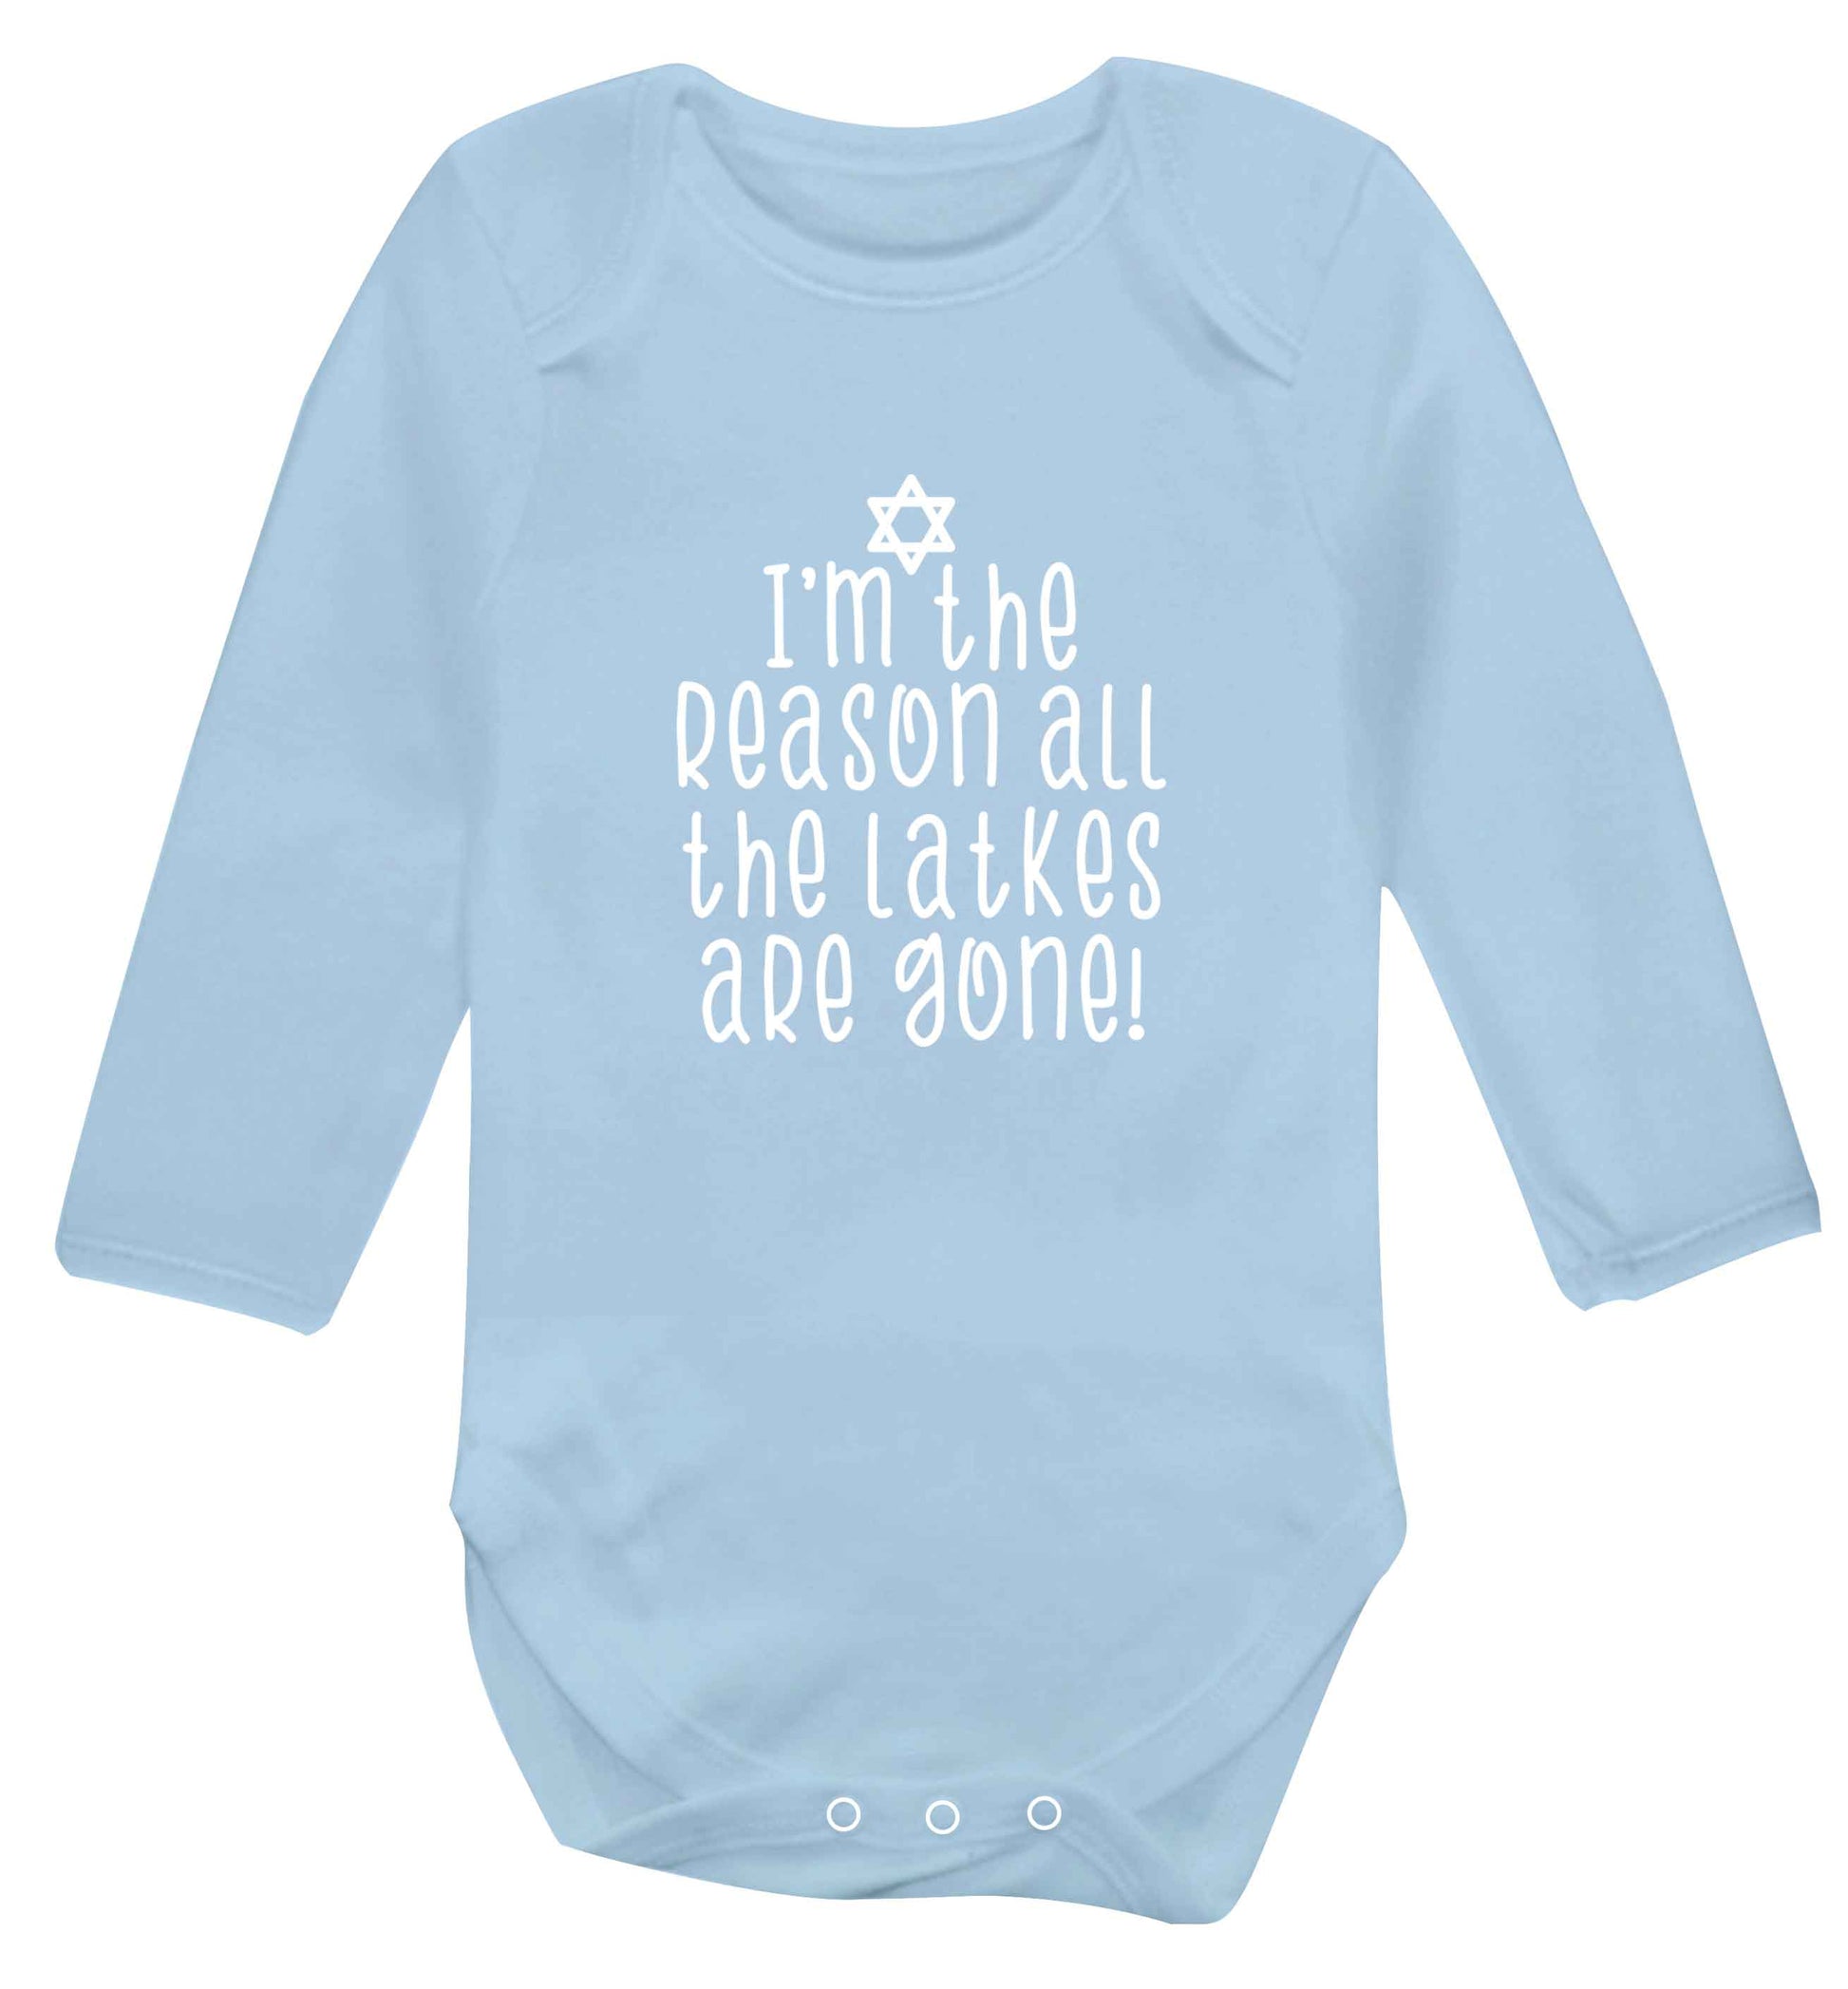 I'm the reason all the latkes are gone baby vest long sleeved pale blue 6-12 months